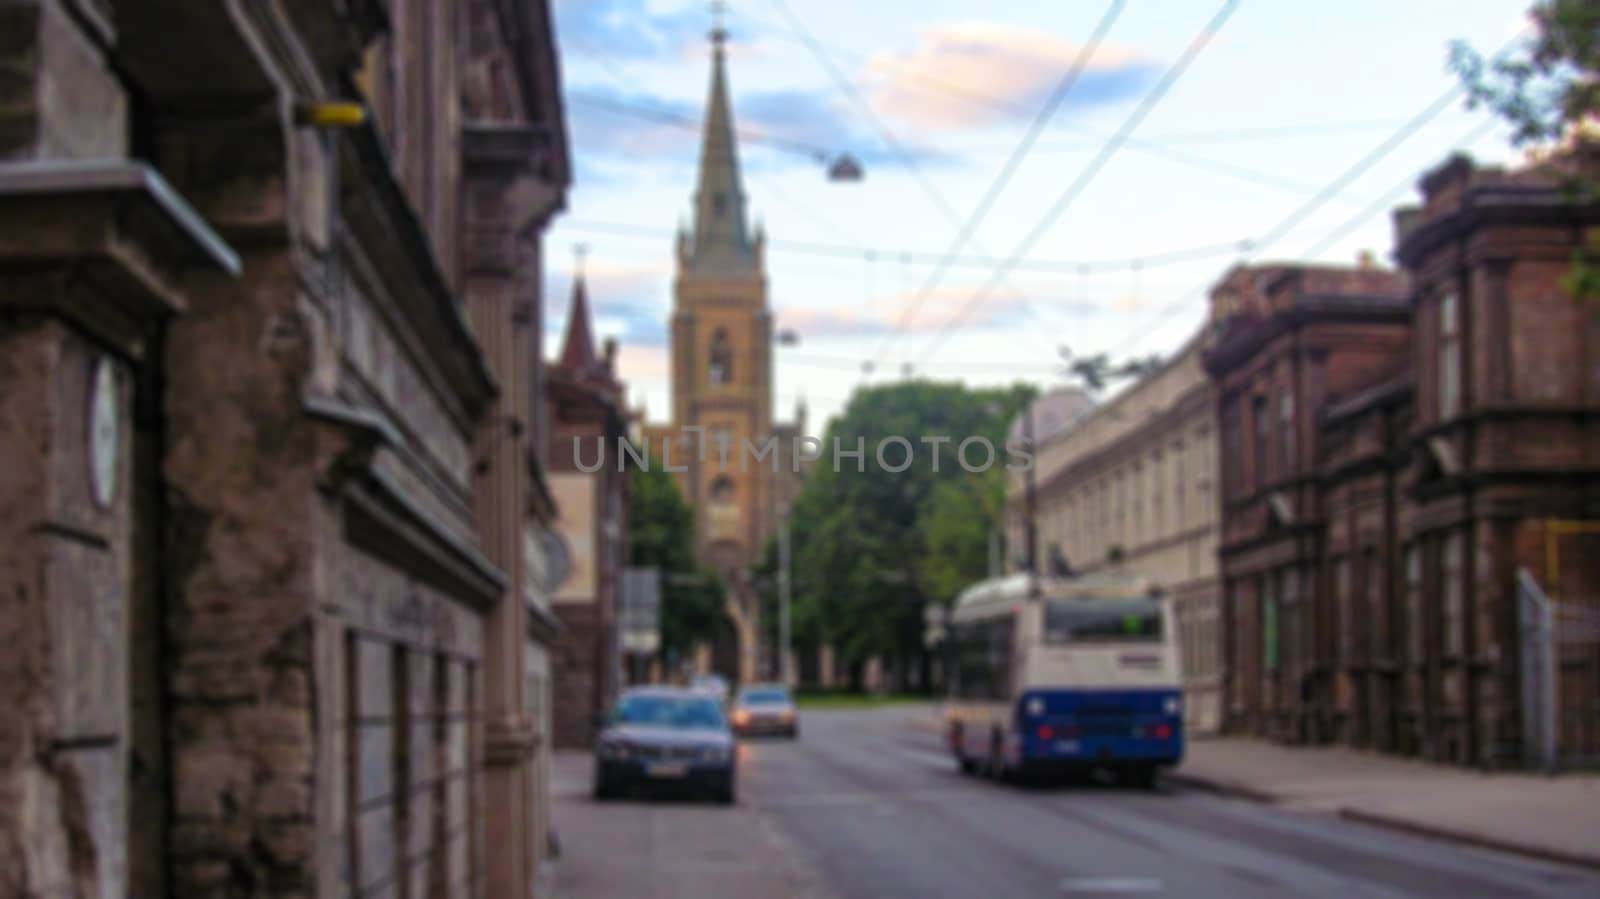 Blurred background of a city street. Urban landscape. Creative t by Grommik